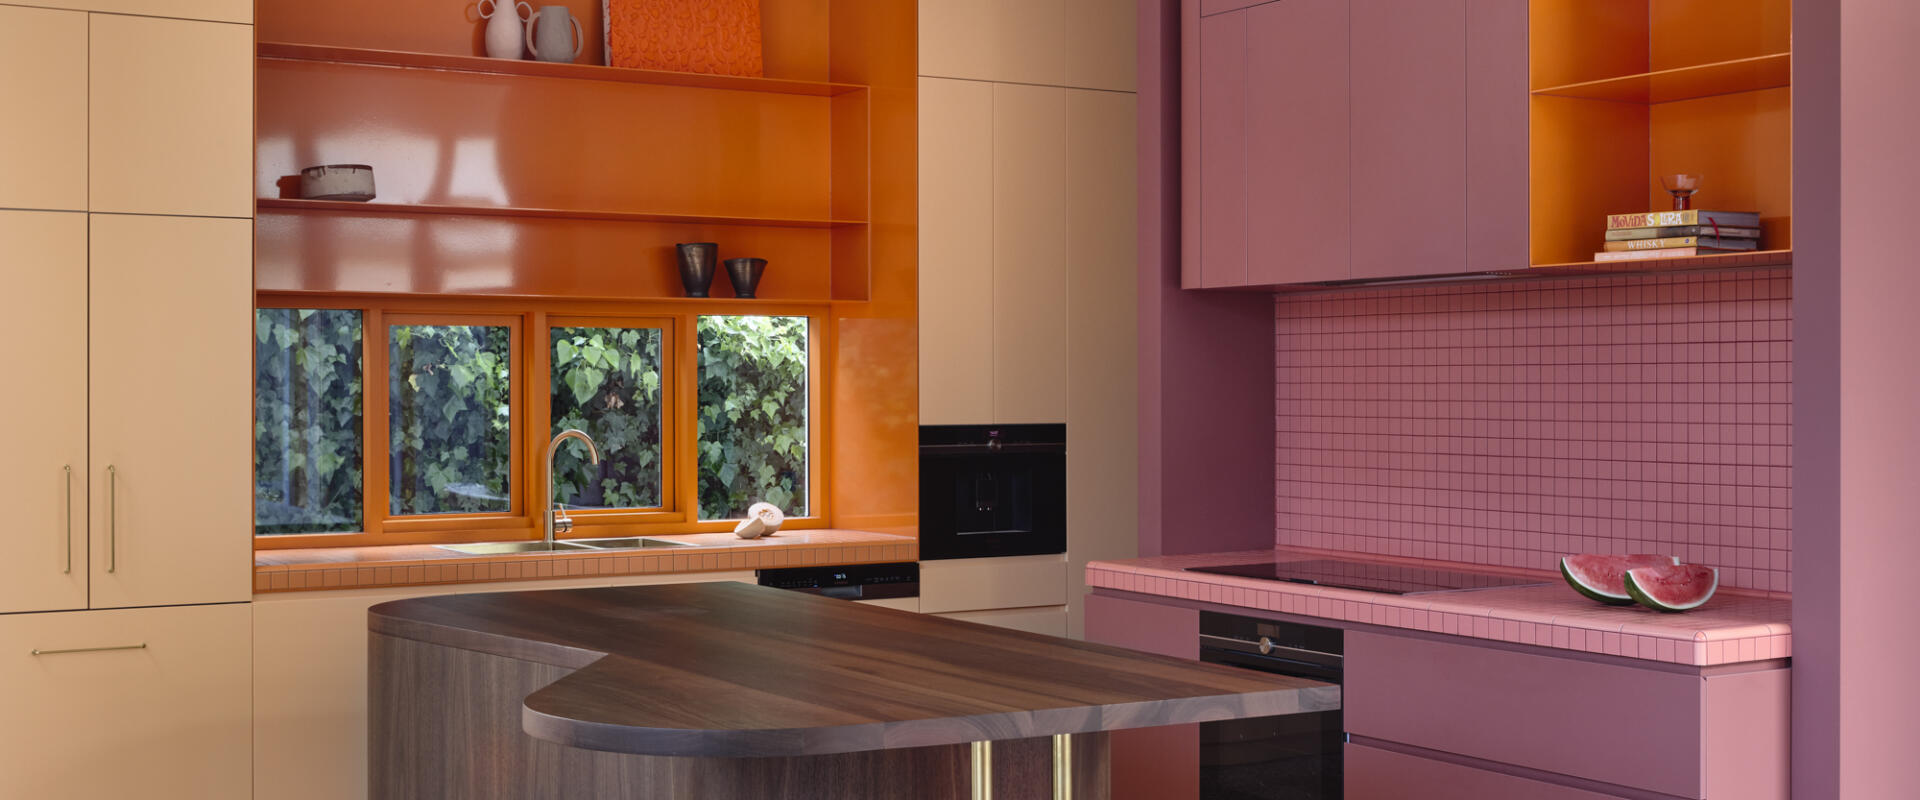 Vibrant pink and orange kitchen featuring timber windows by Pickering Joinery